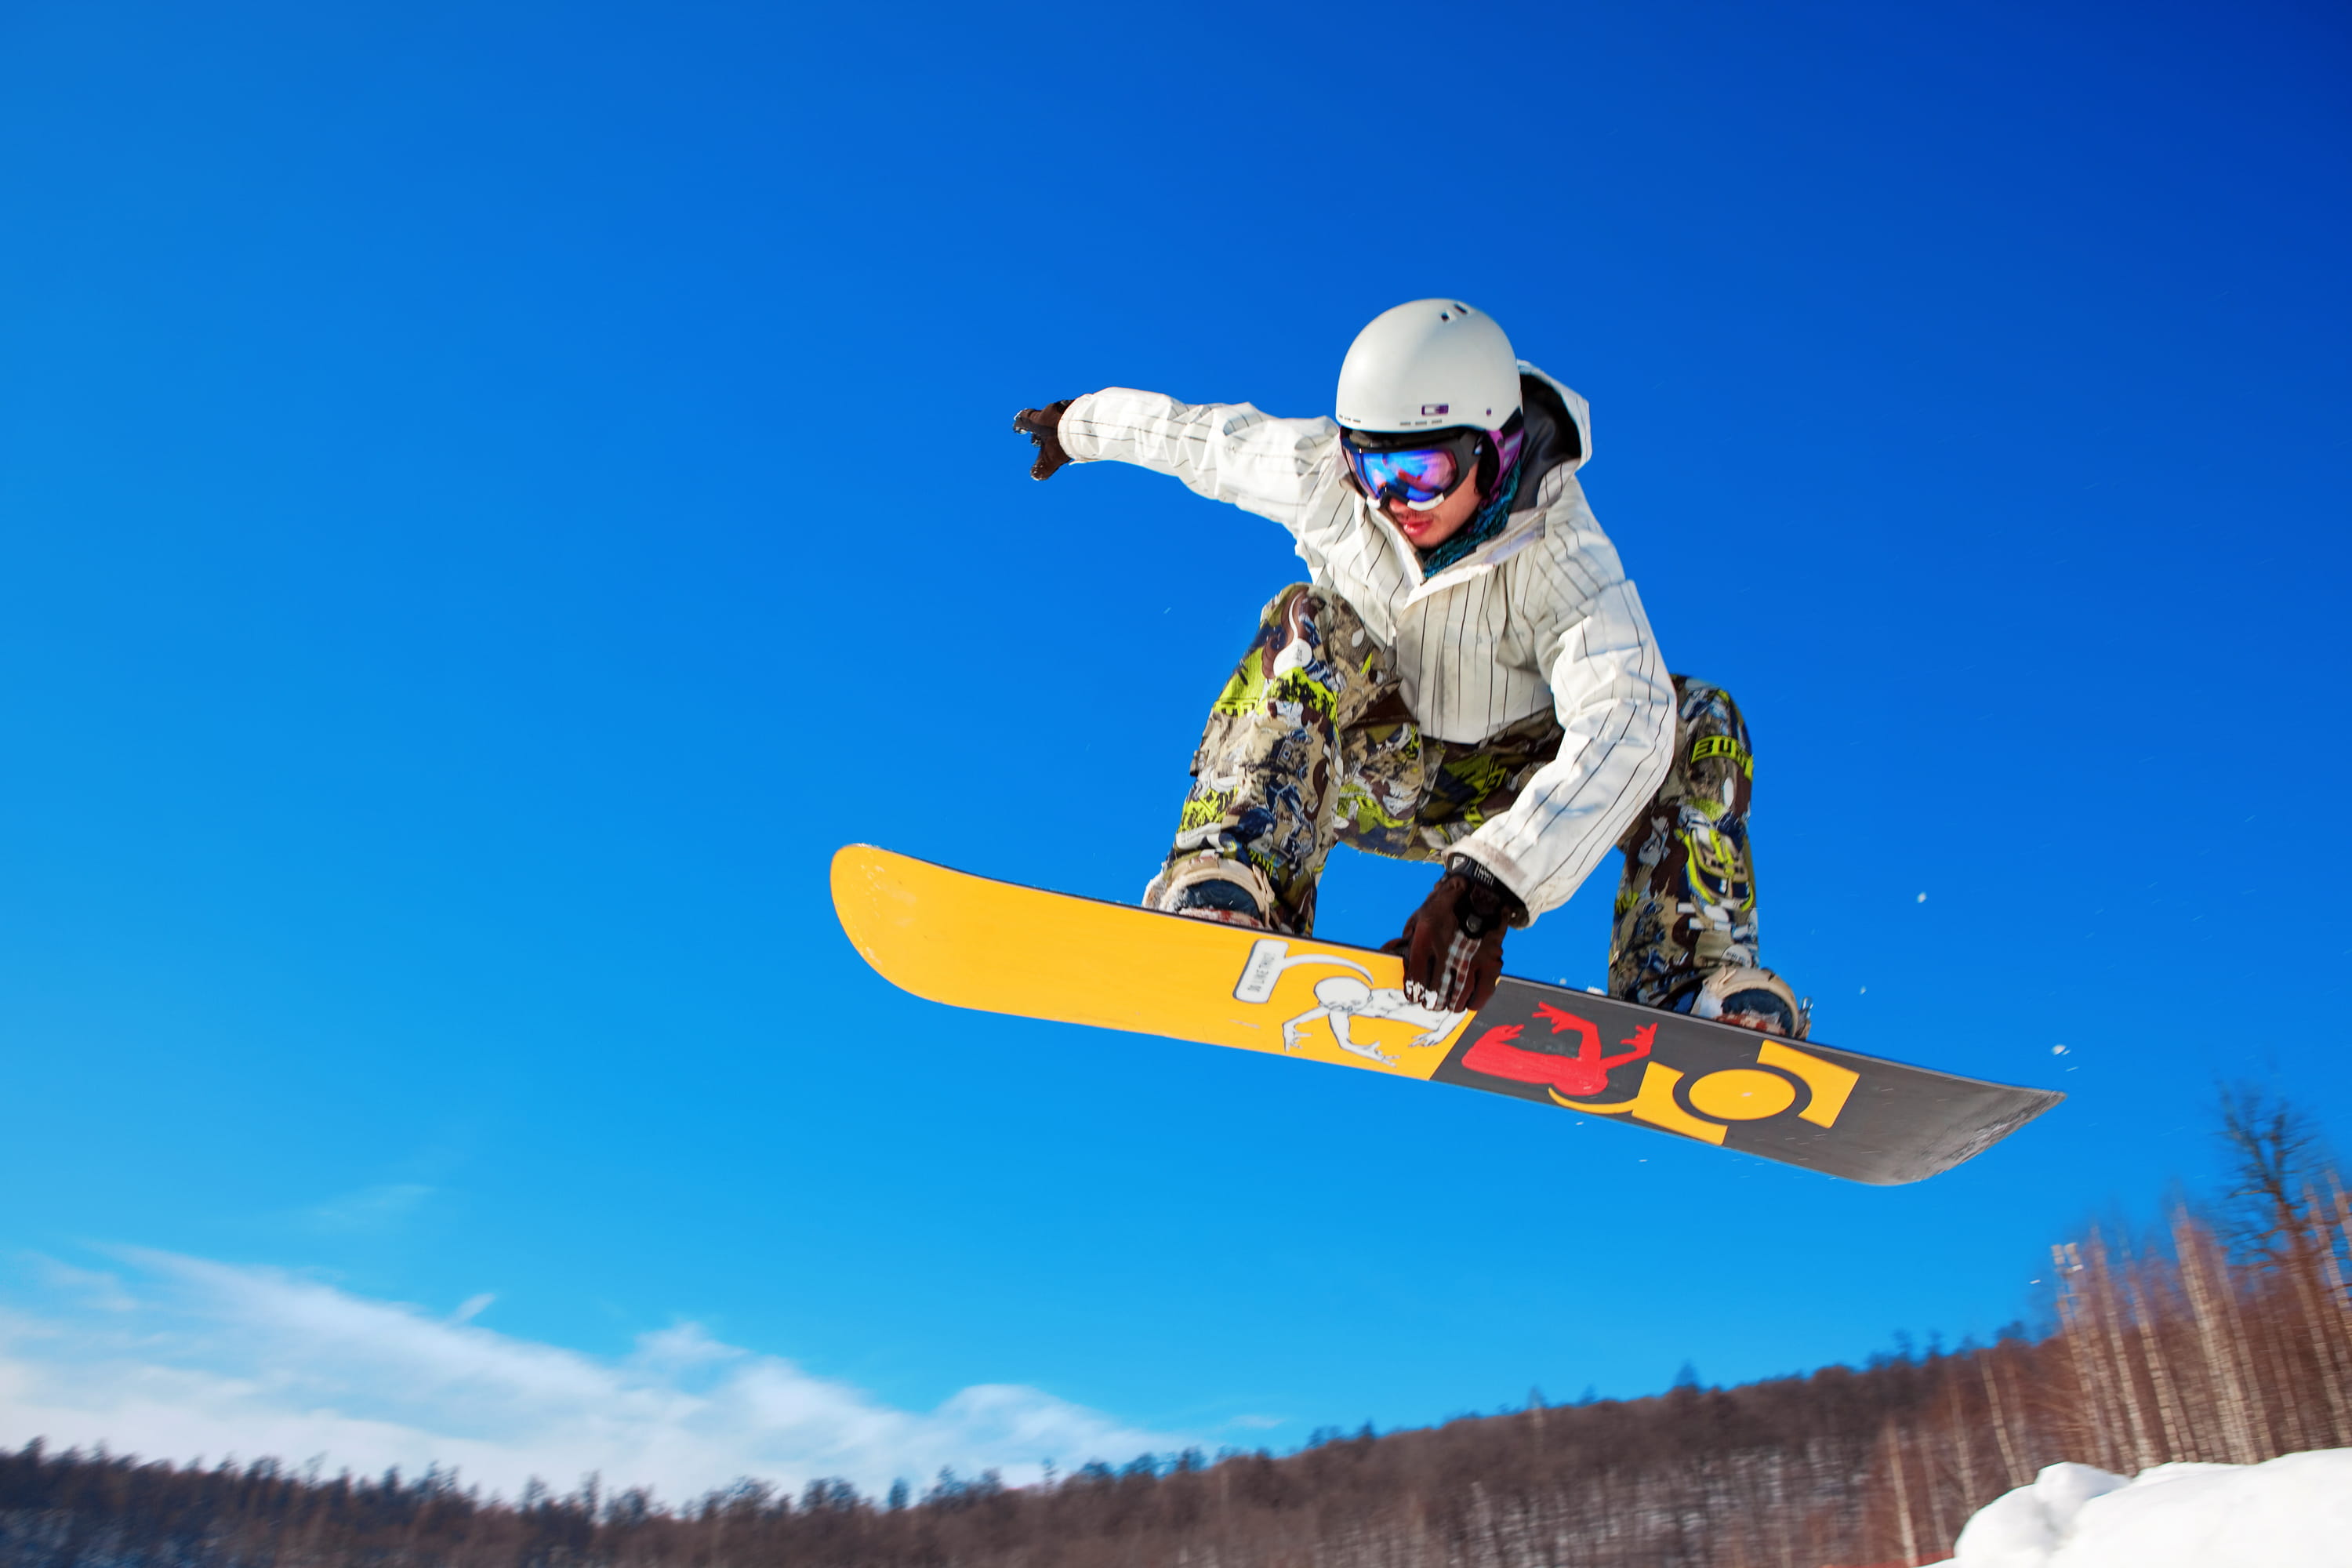 snowboarder, sport, winter, blue, cold, extreme, flying, guy